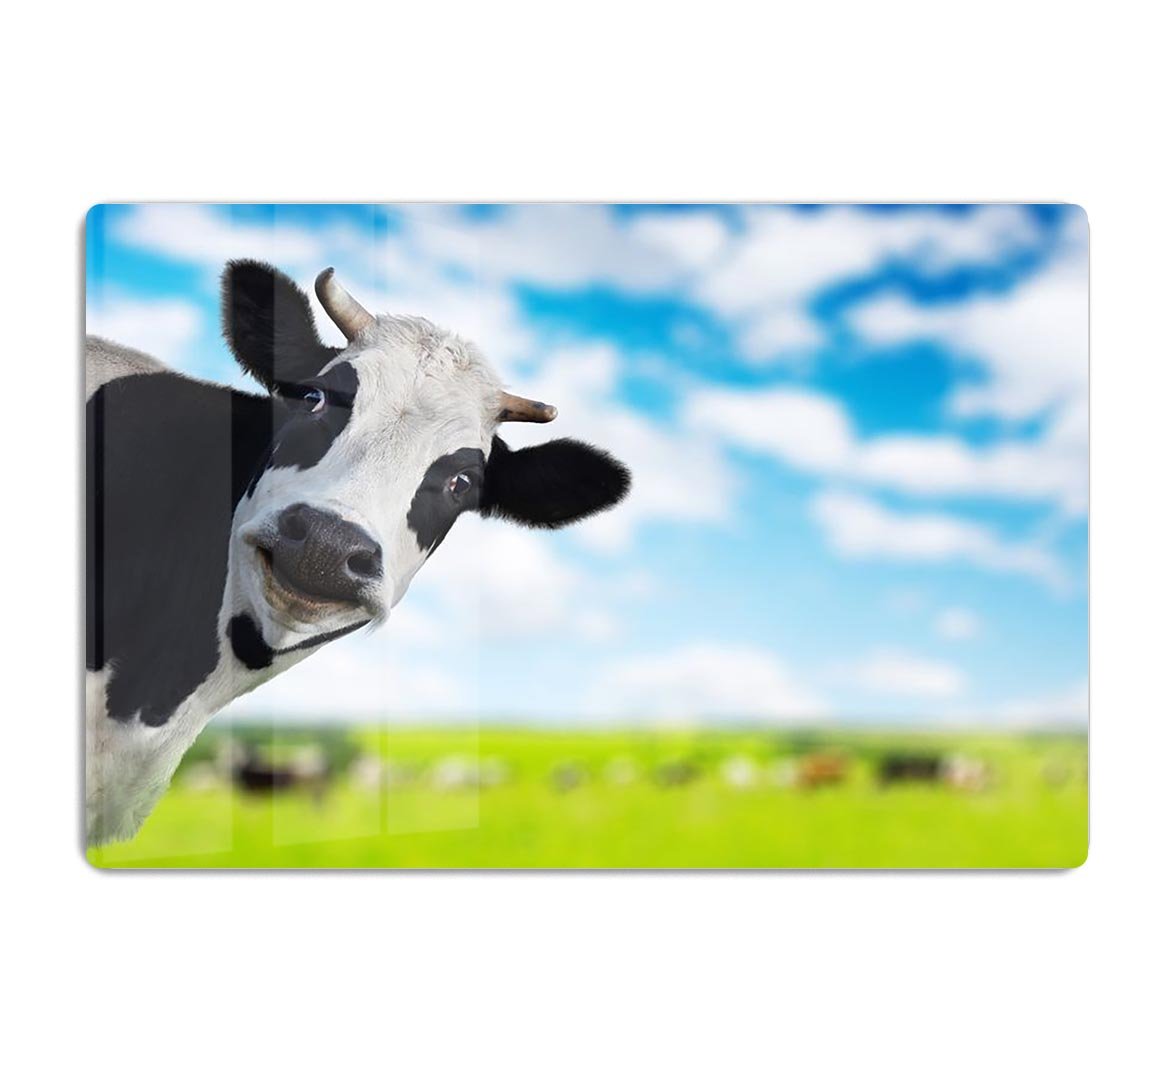 Funny cow looking to a camera HD Metal Print - Canvas Art Rocks - 1